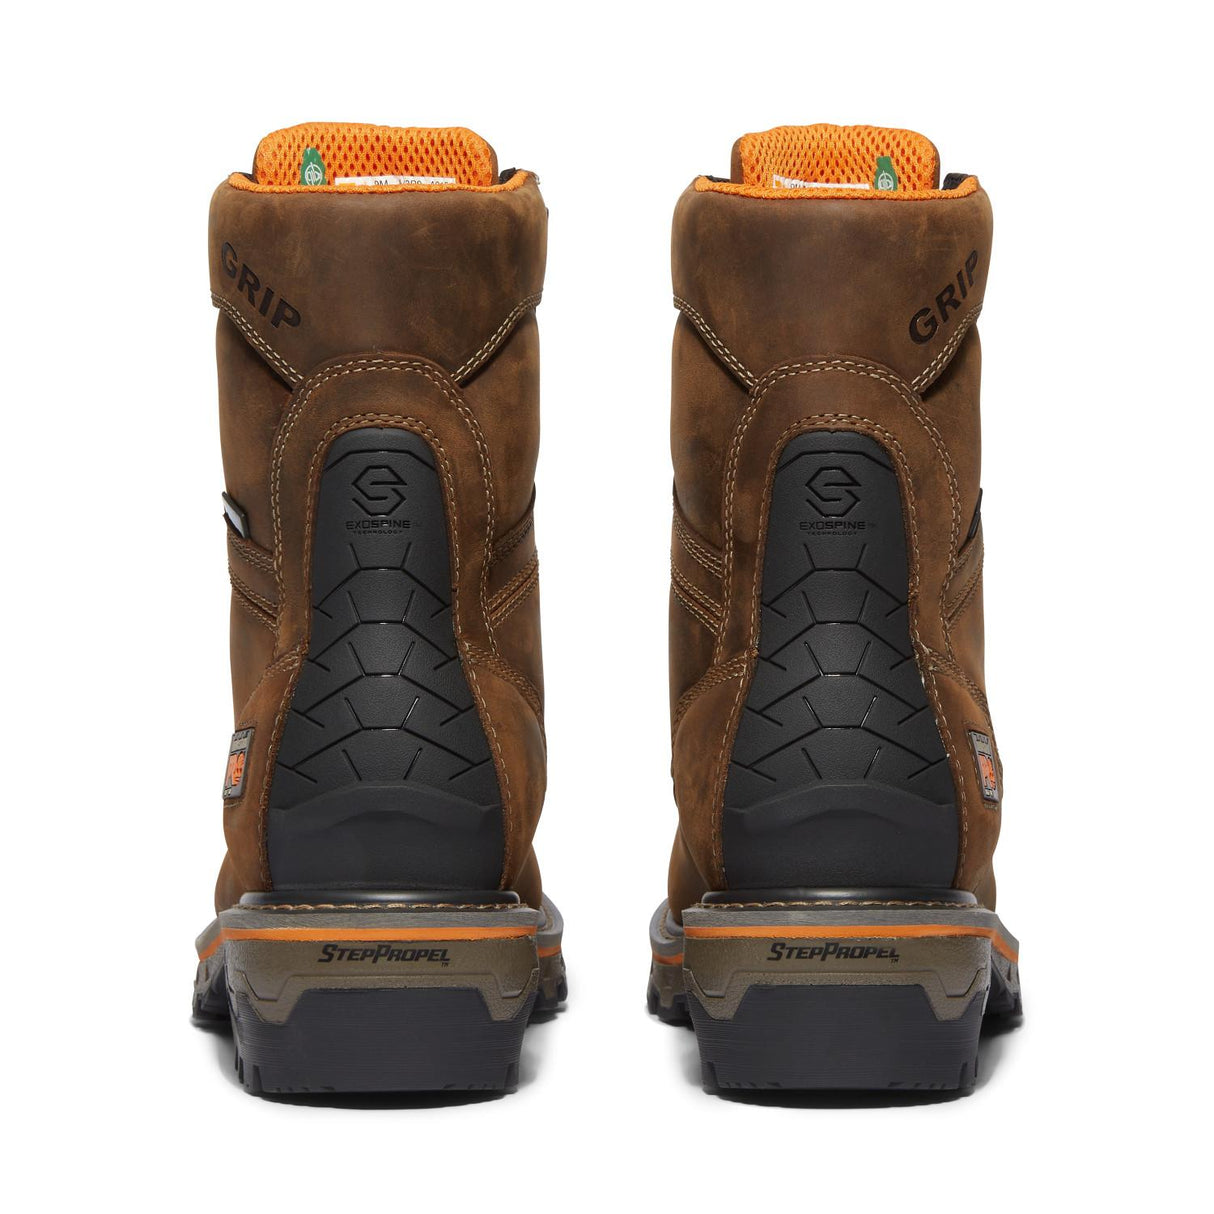 Timberland Pro-Boondock Hd Logger Brown-Steel Toes-8